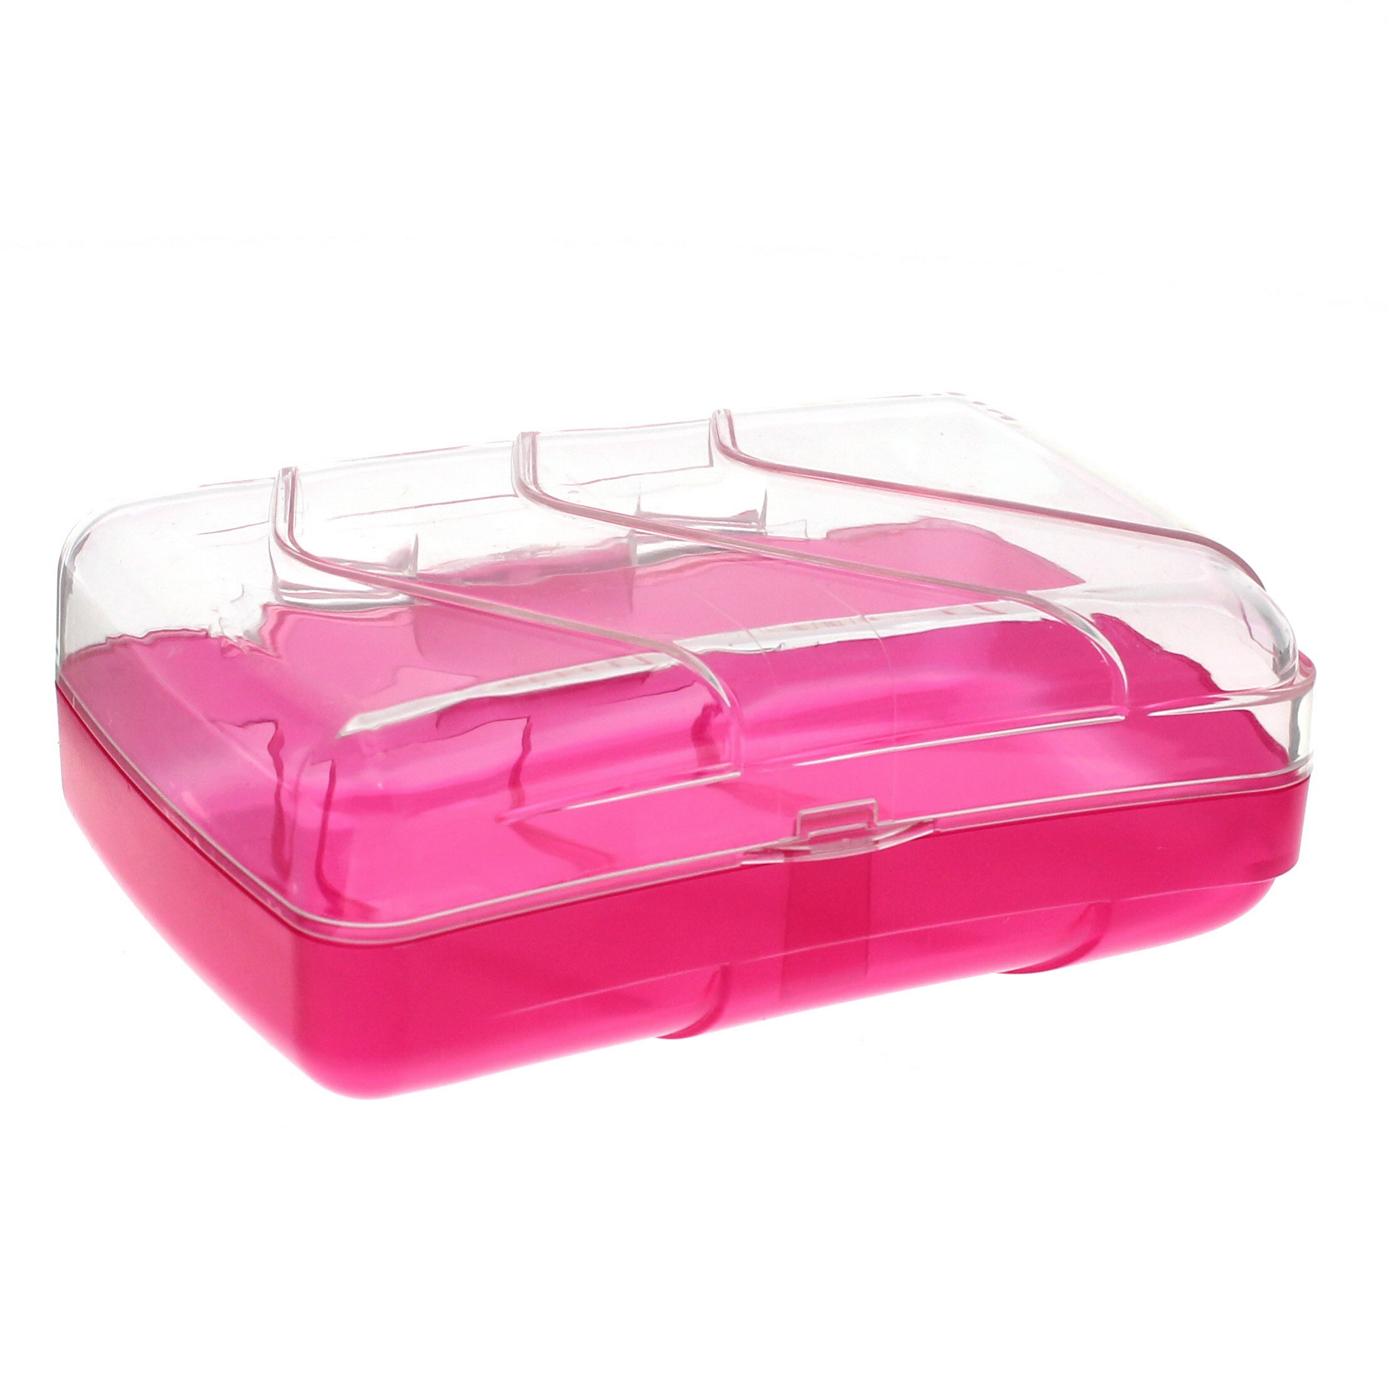 Sprayco Travel Guard Hinged Soap Dish - Assorted; image 3 of 5